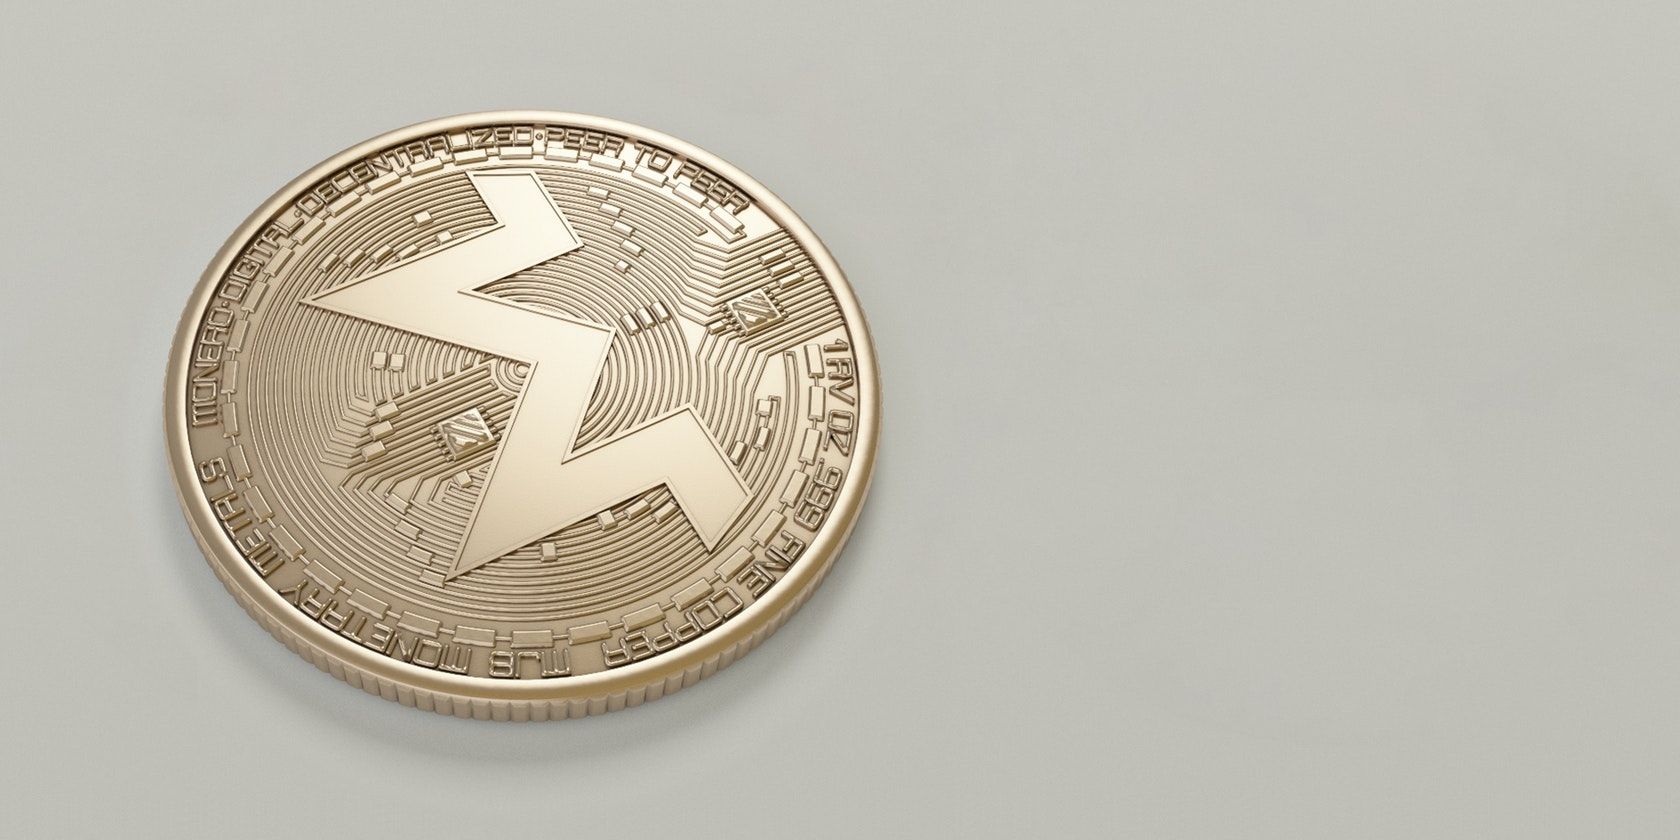 Pexels stock image of Monero privacy coin on a white surface